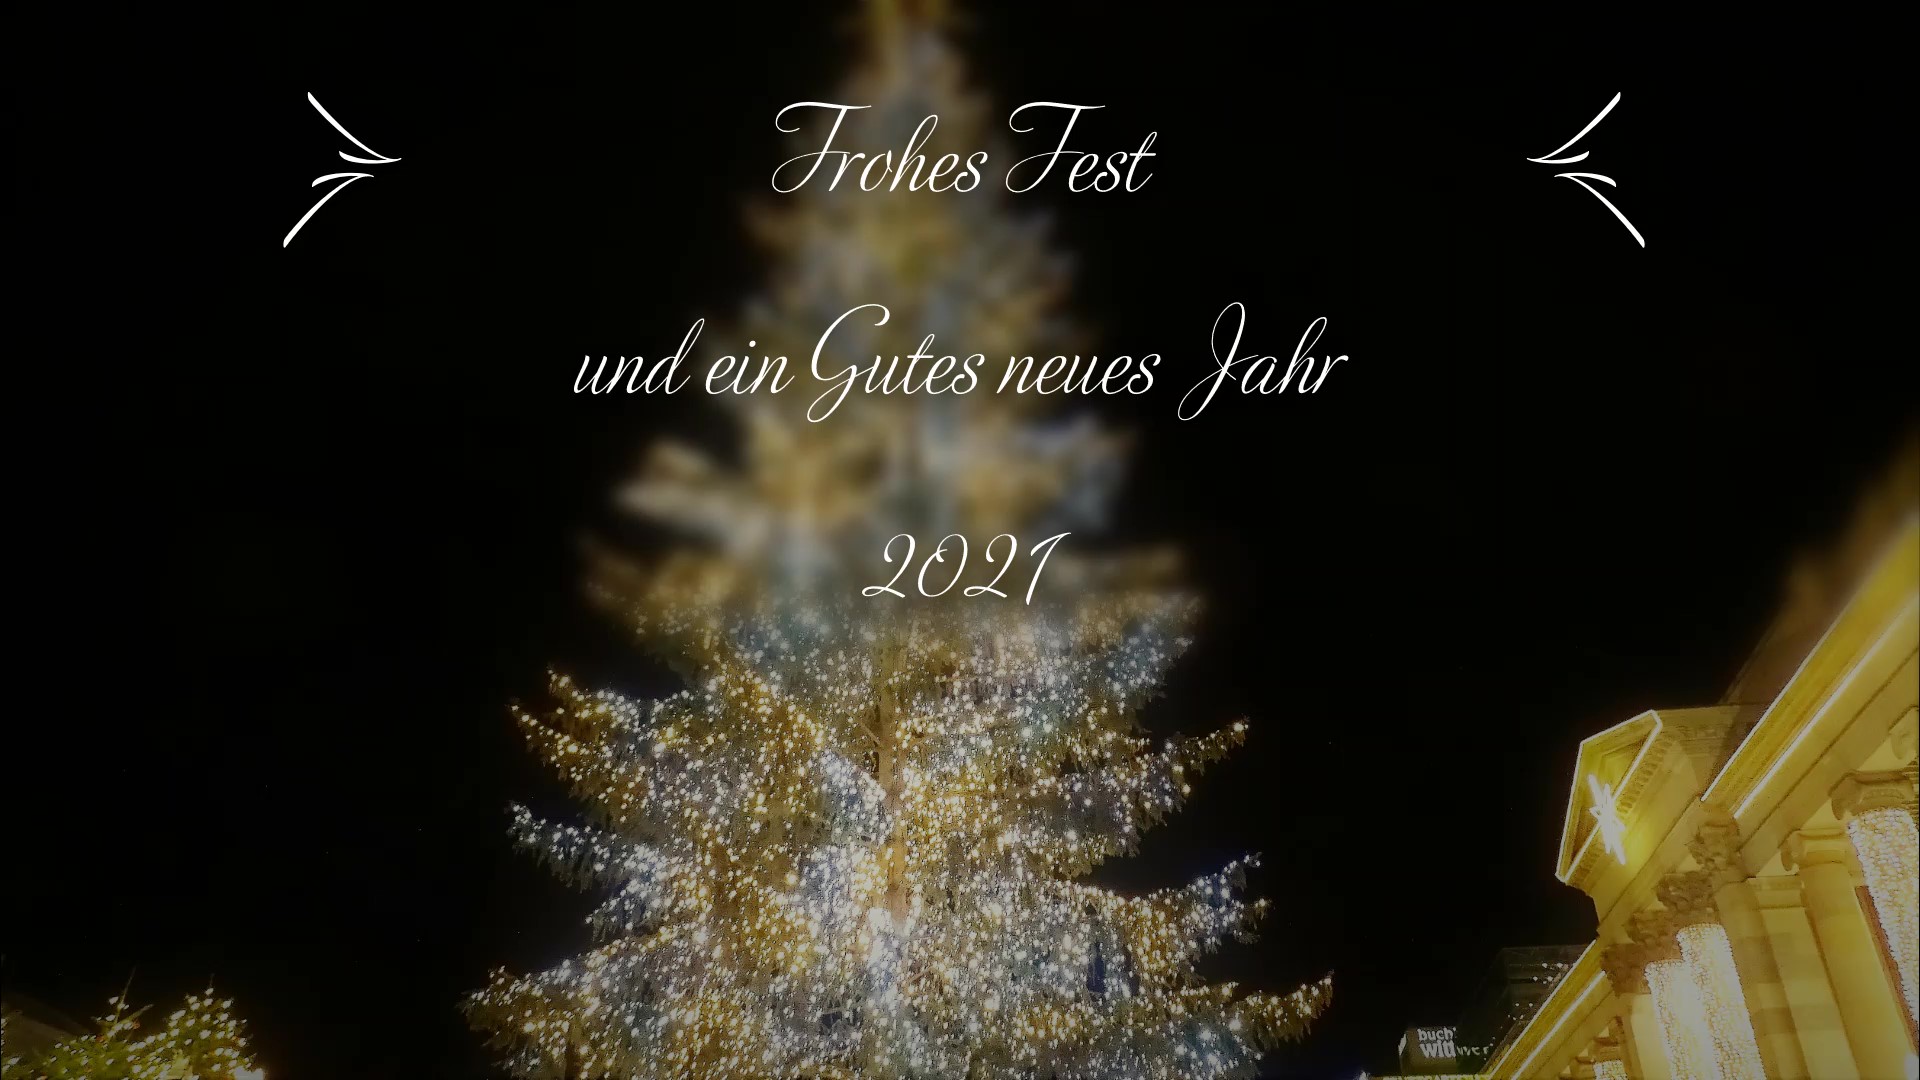 Frohes Fest Euch allen FC lern  Merry Christmas